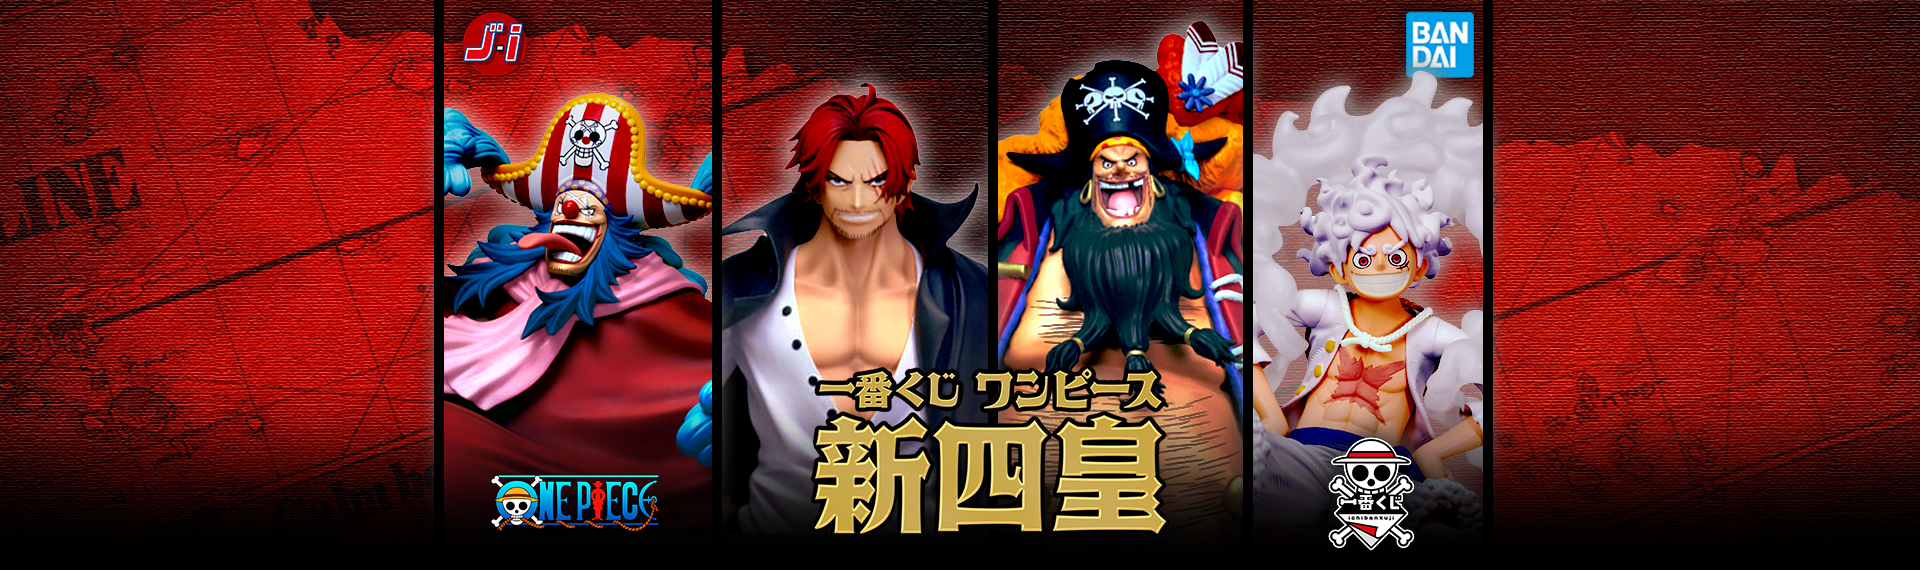 ONE PIECE FIGURE ICHIBAN KUJI NEW FOUR EMPERORS - D PRIZE - BUGGY